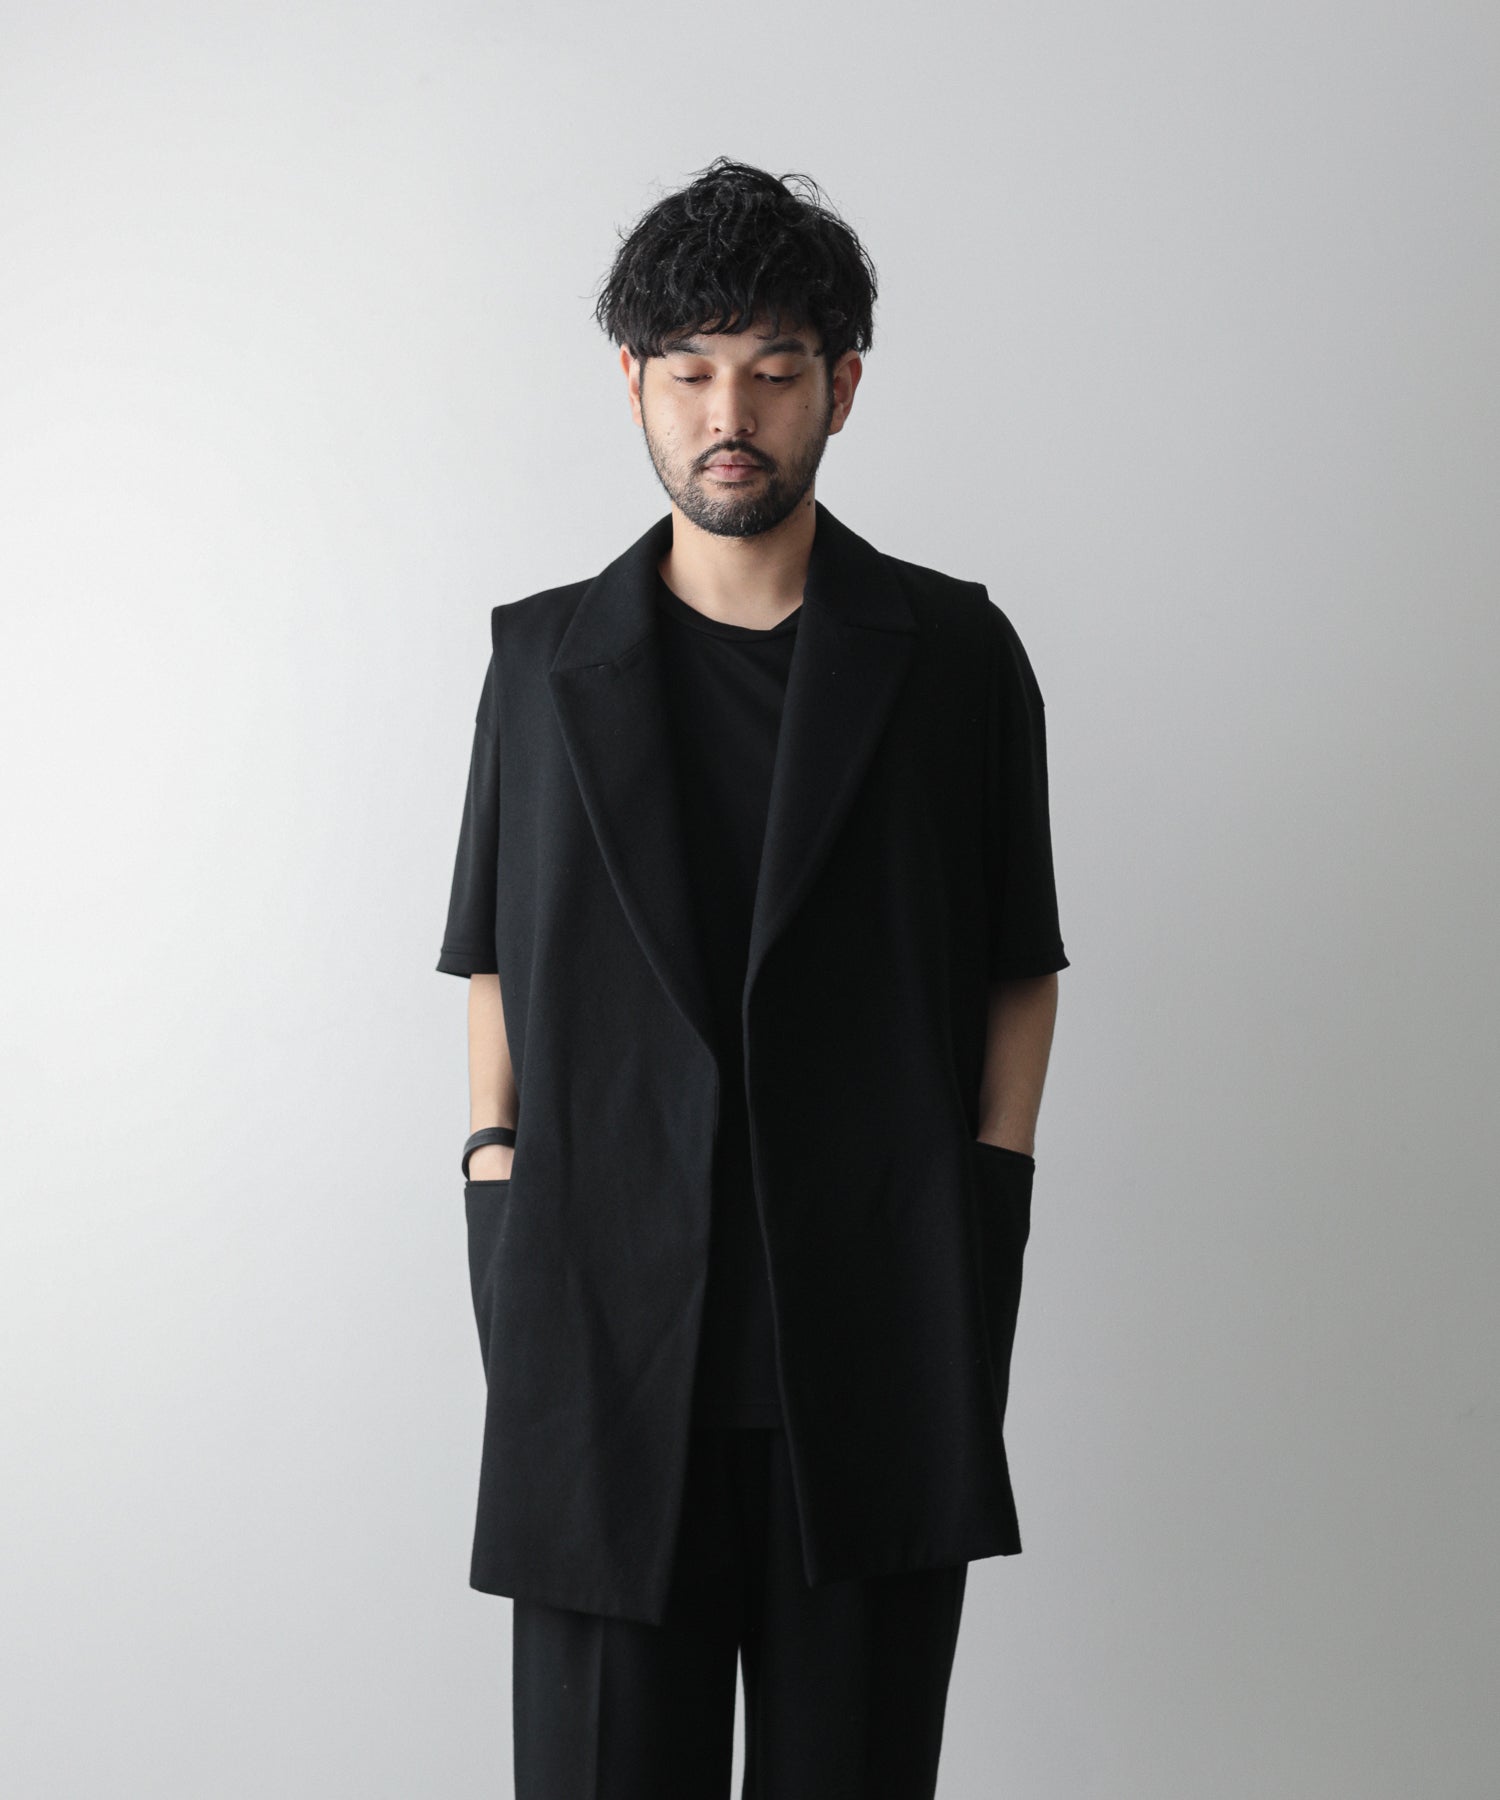 stein】OVERSIZED NO SLEEVE JACKET - BLACK | 公式通販サイト session ...